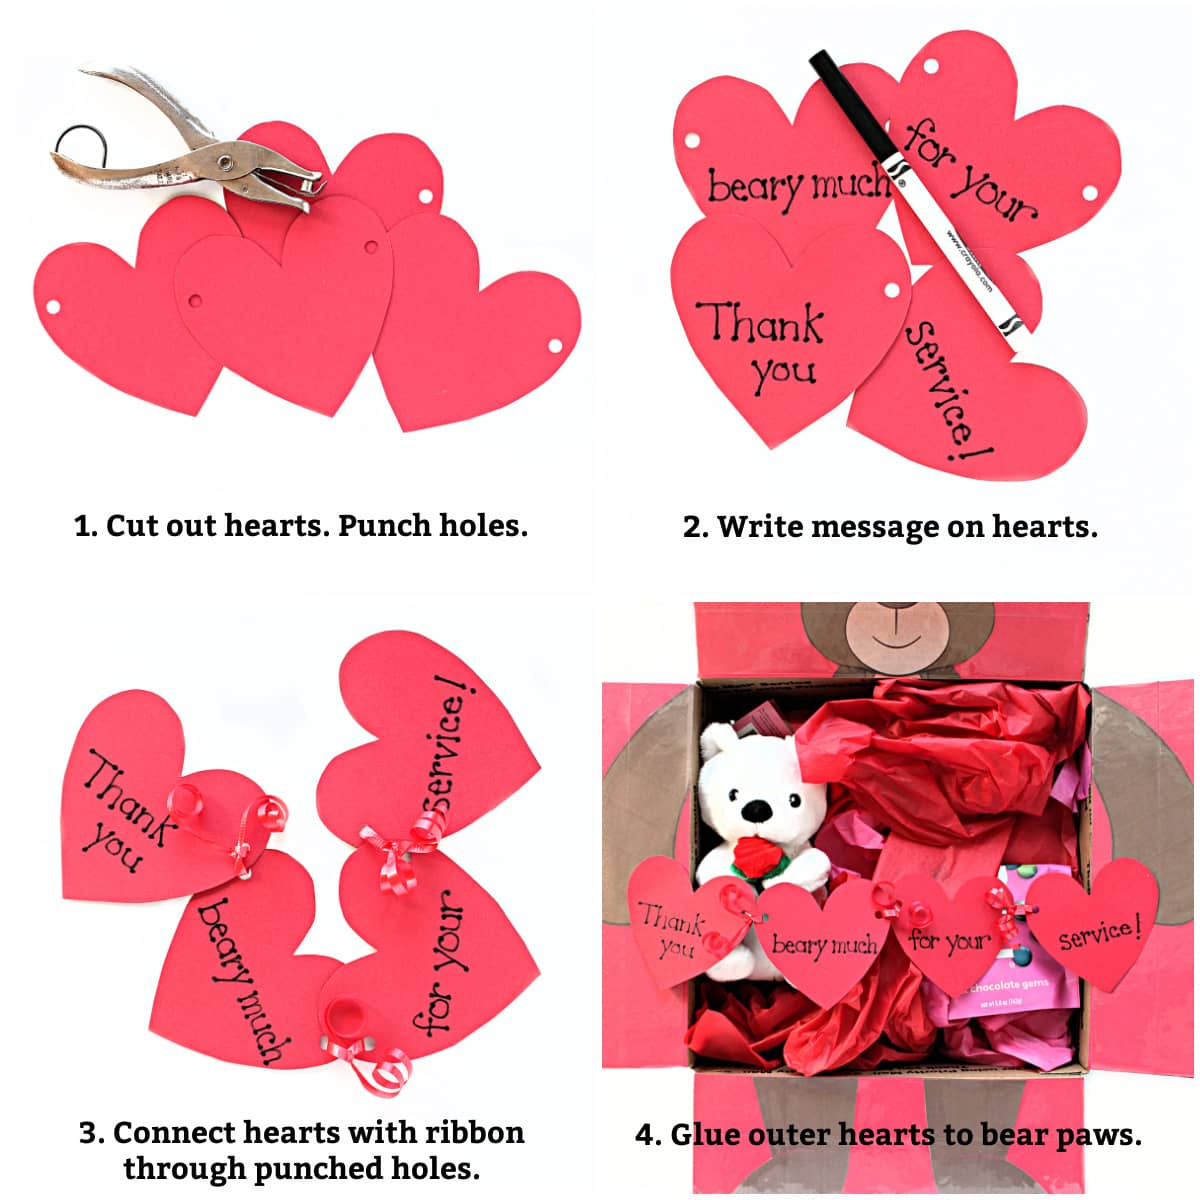 Instructions: cut out hearts, punch holes, write message, link with ribbon, glue outer hearts to paws.